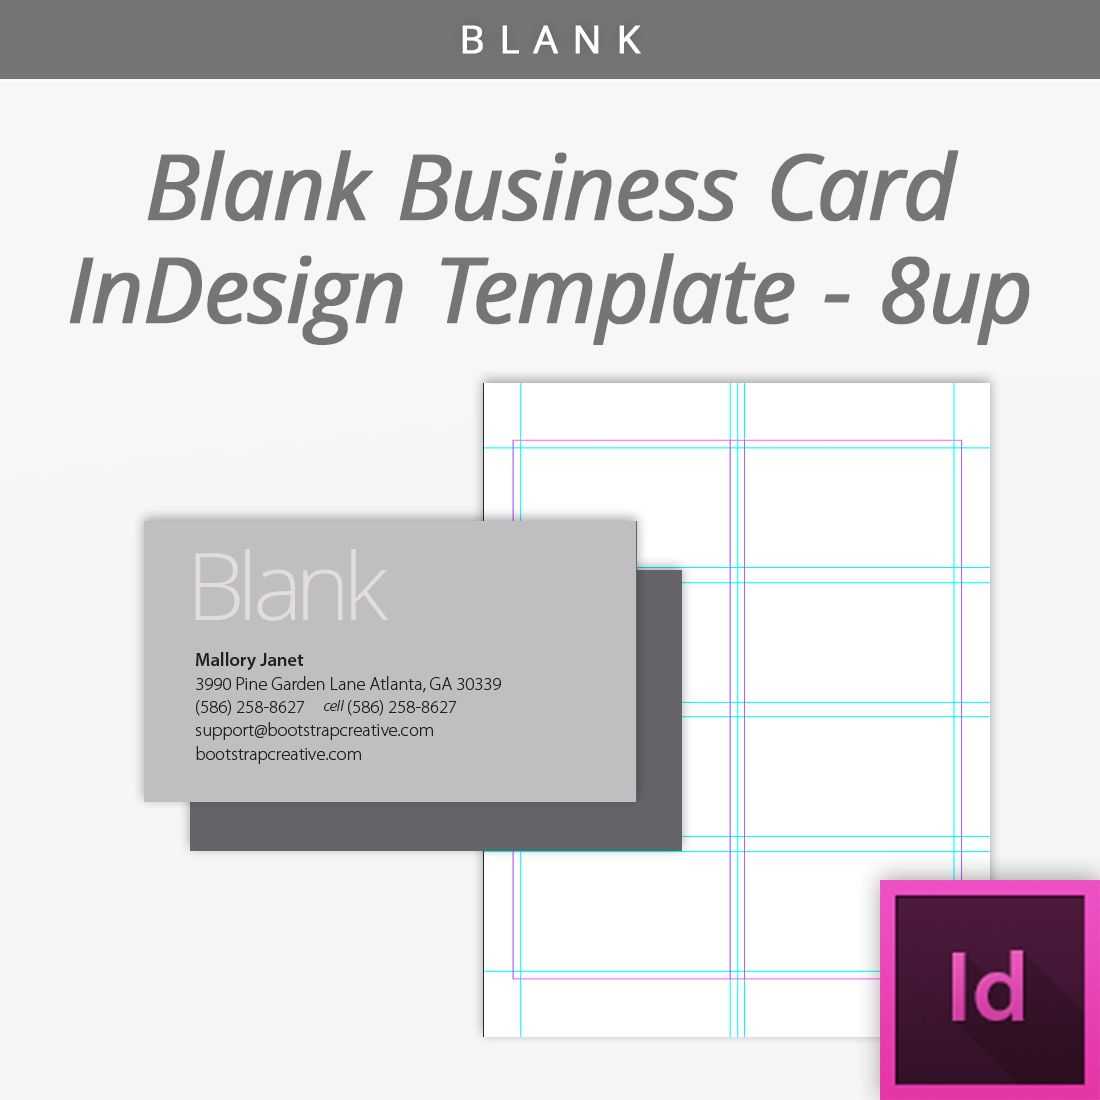 Bootstrap Creative | Blank Business Cards, Indesign With Regard To Birthday Card Indesign Template